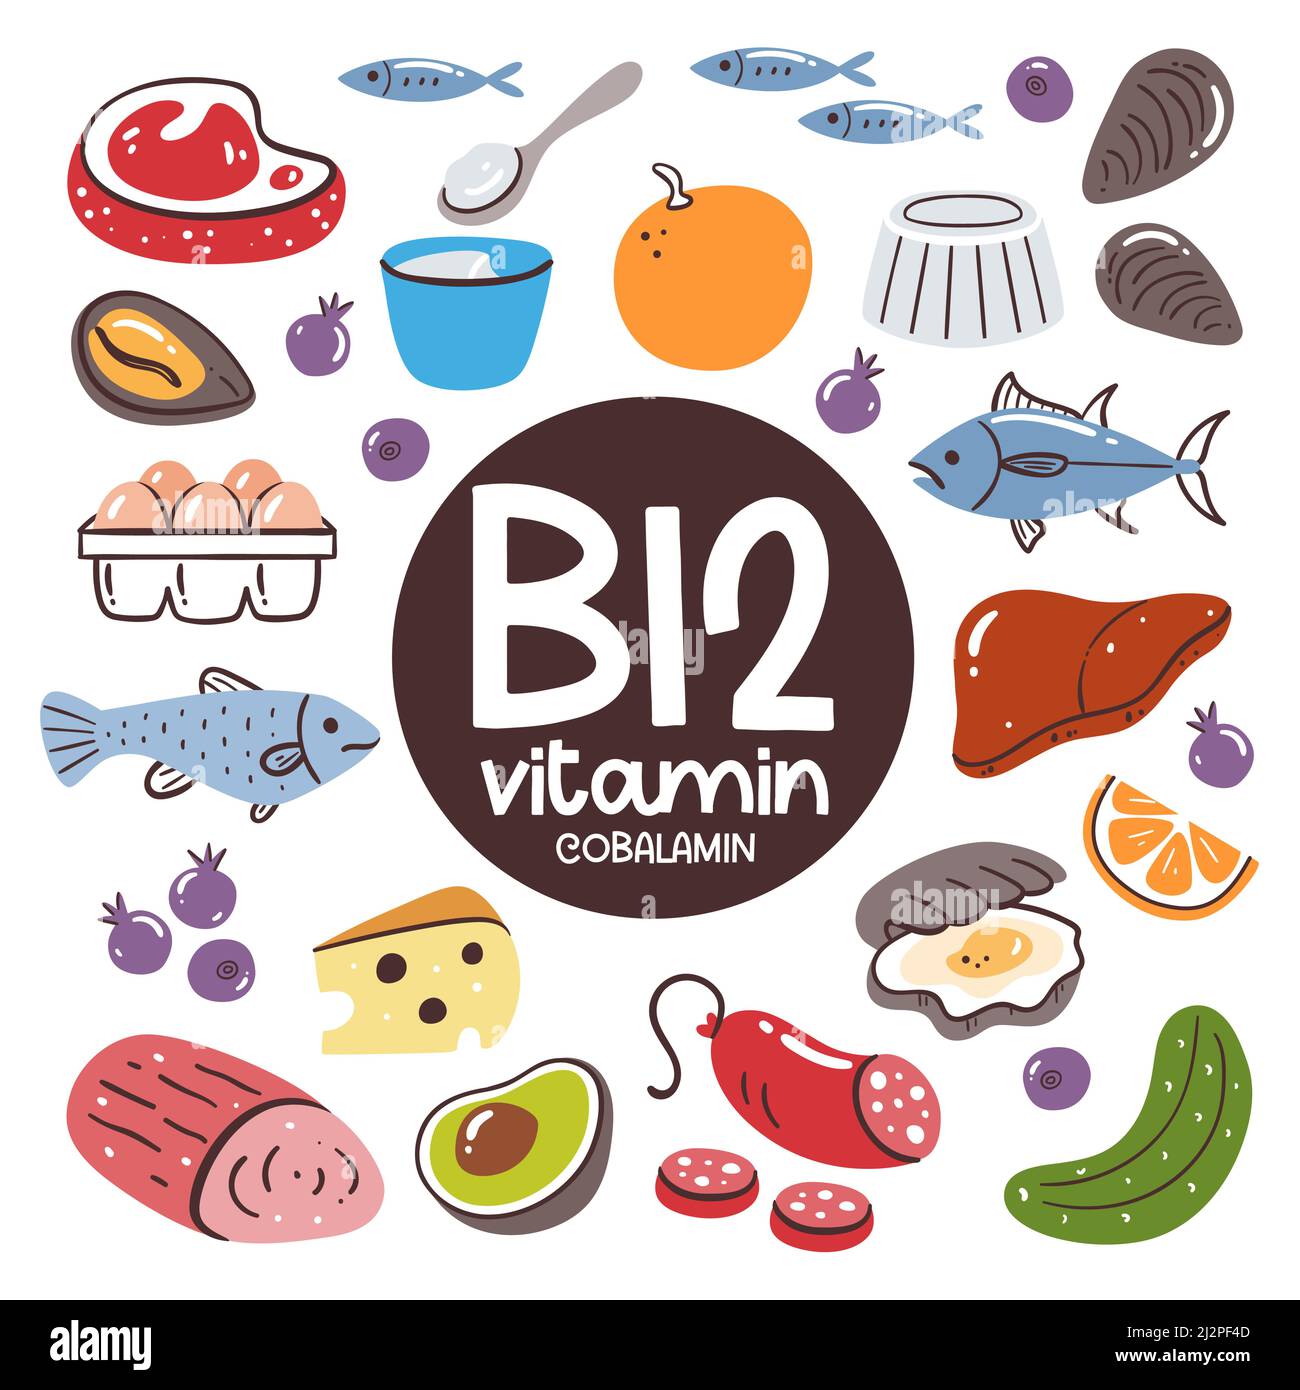 Food products with high level of Vitamin B12 (Cobalamin). Seafood, meat, liver, eggs, dairy, fruits. Stock Vector